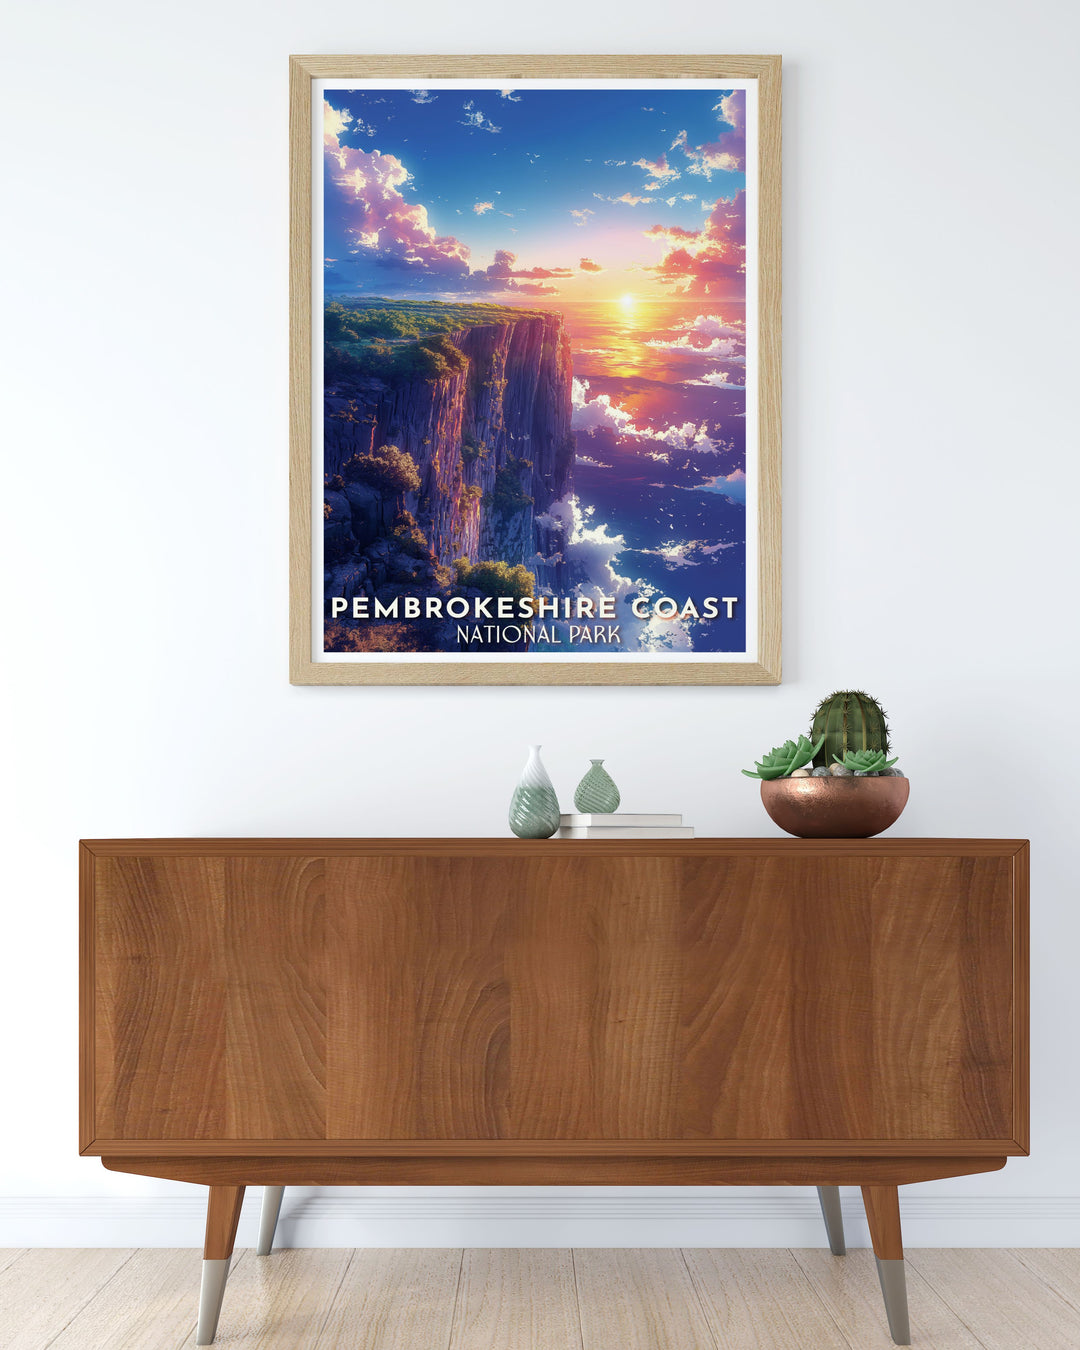 Pembrokeshire Coast poster capturing the dramatic cliffs of Wales with vibrant colors and vintage travel art style making it a perfect addition to your bucket list prints or as a captivating piece of home decor.